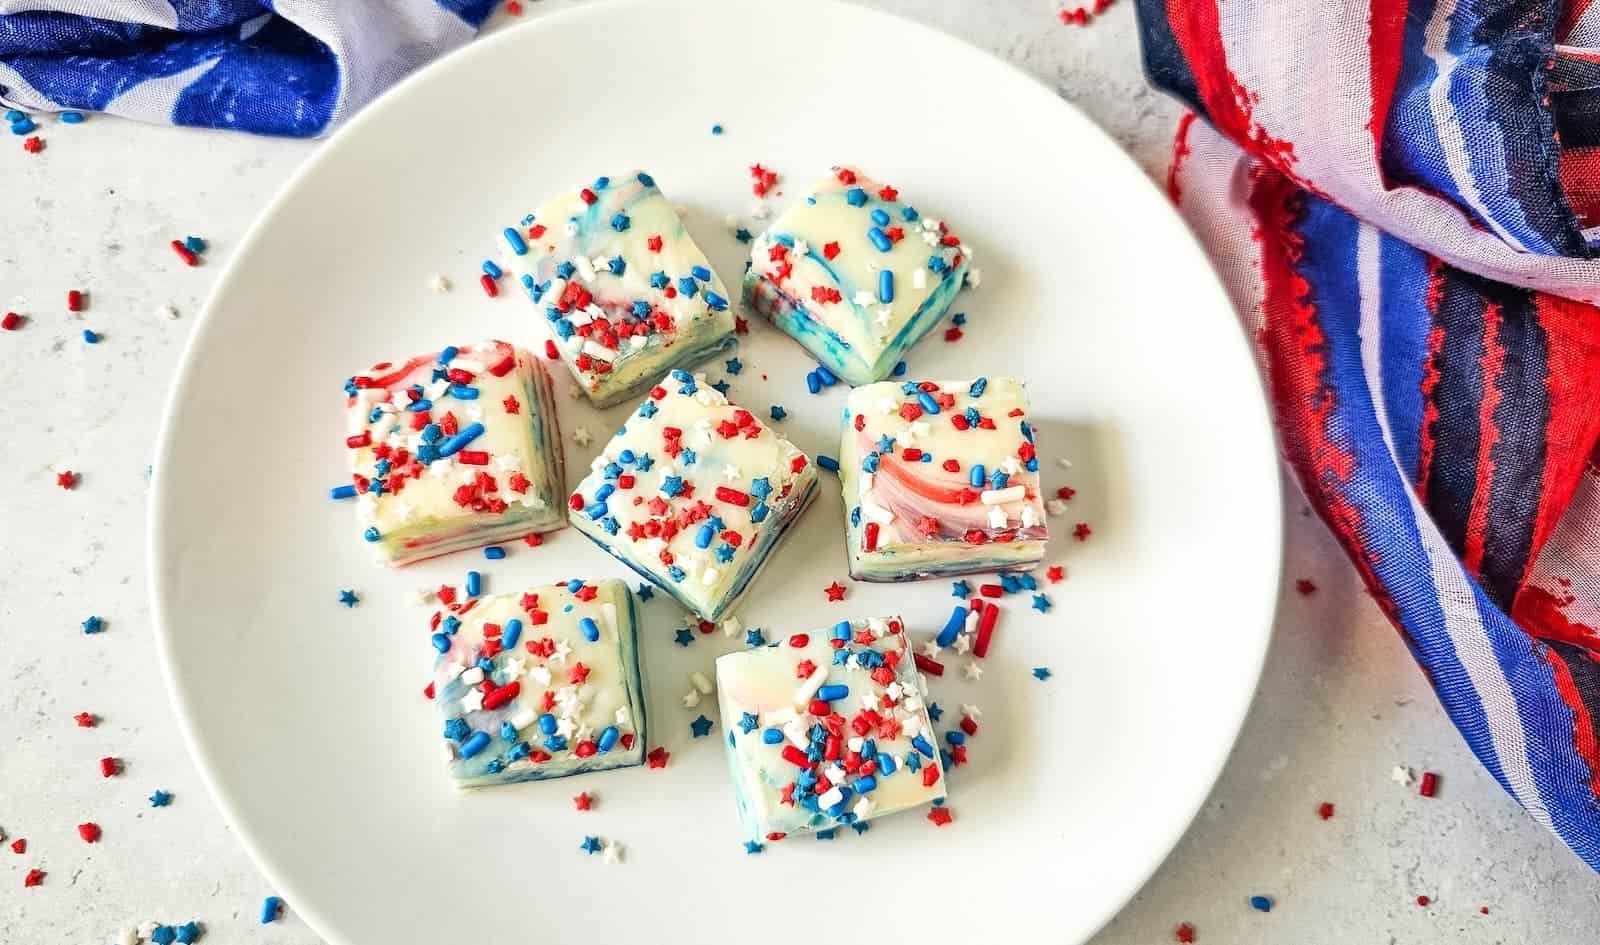 A white plate holds seven pieces of fudge decorated with red, white, and blue sprinkles, situated on a white surface with a red, white, and blue cloth nearby.